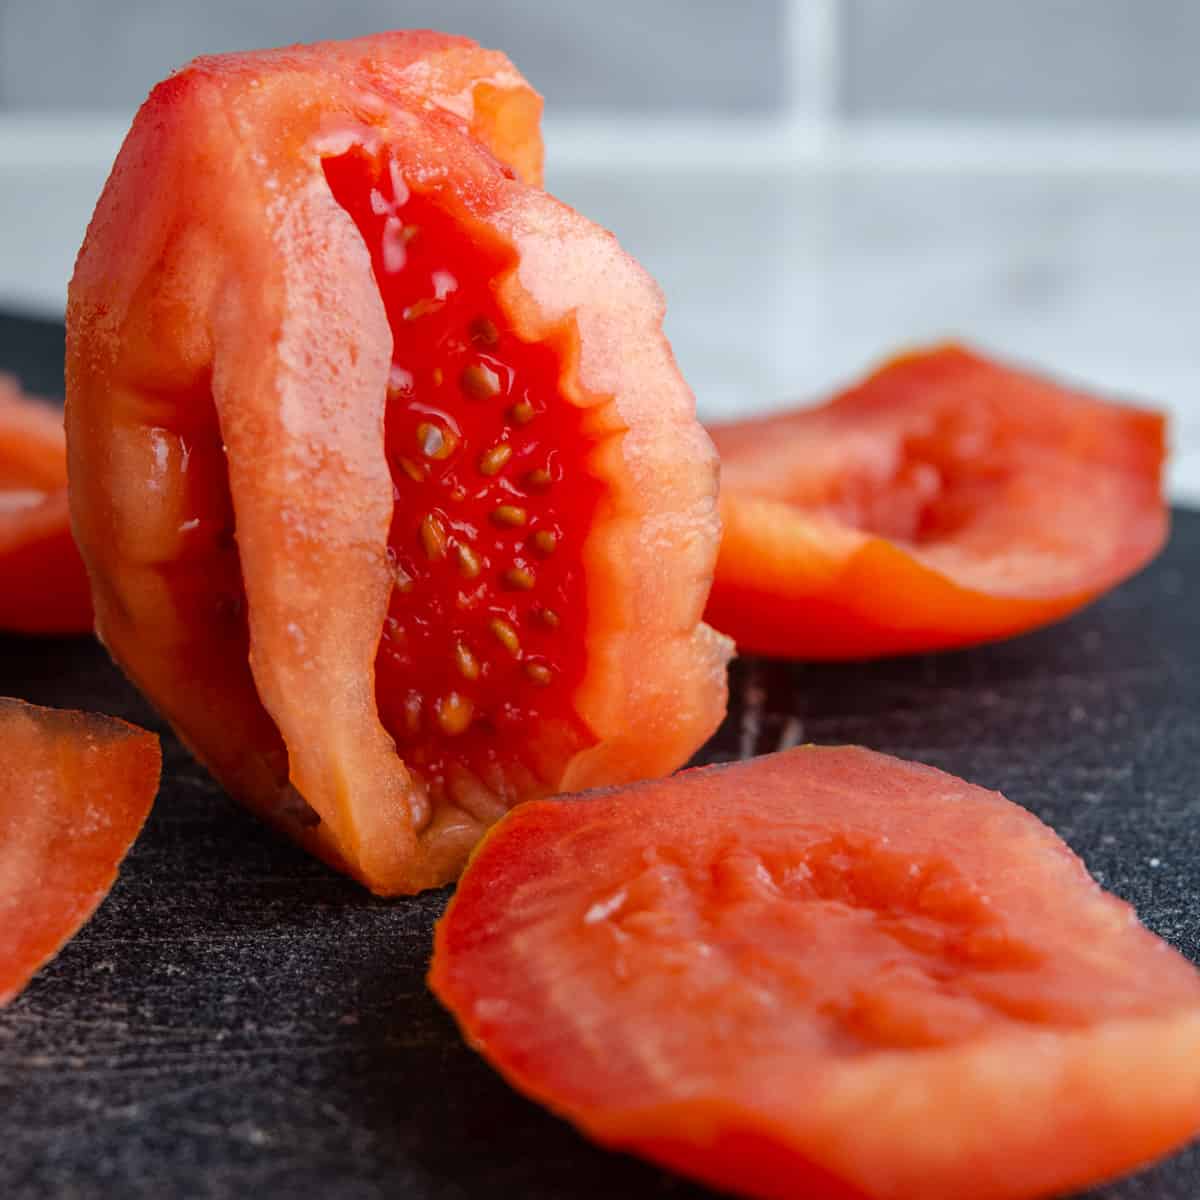 A tomato with the flesh removed